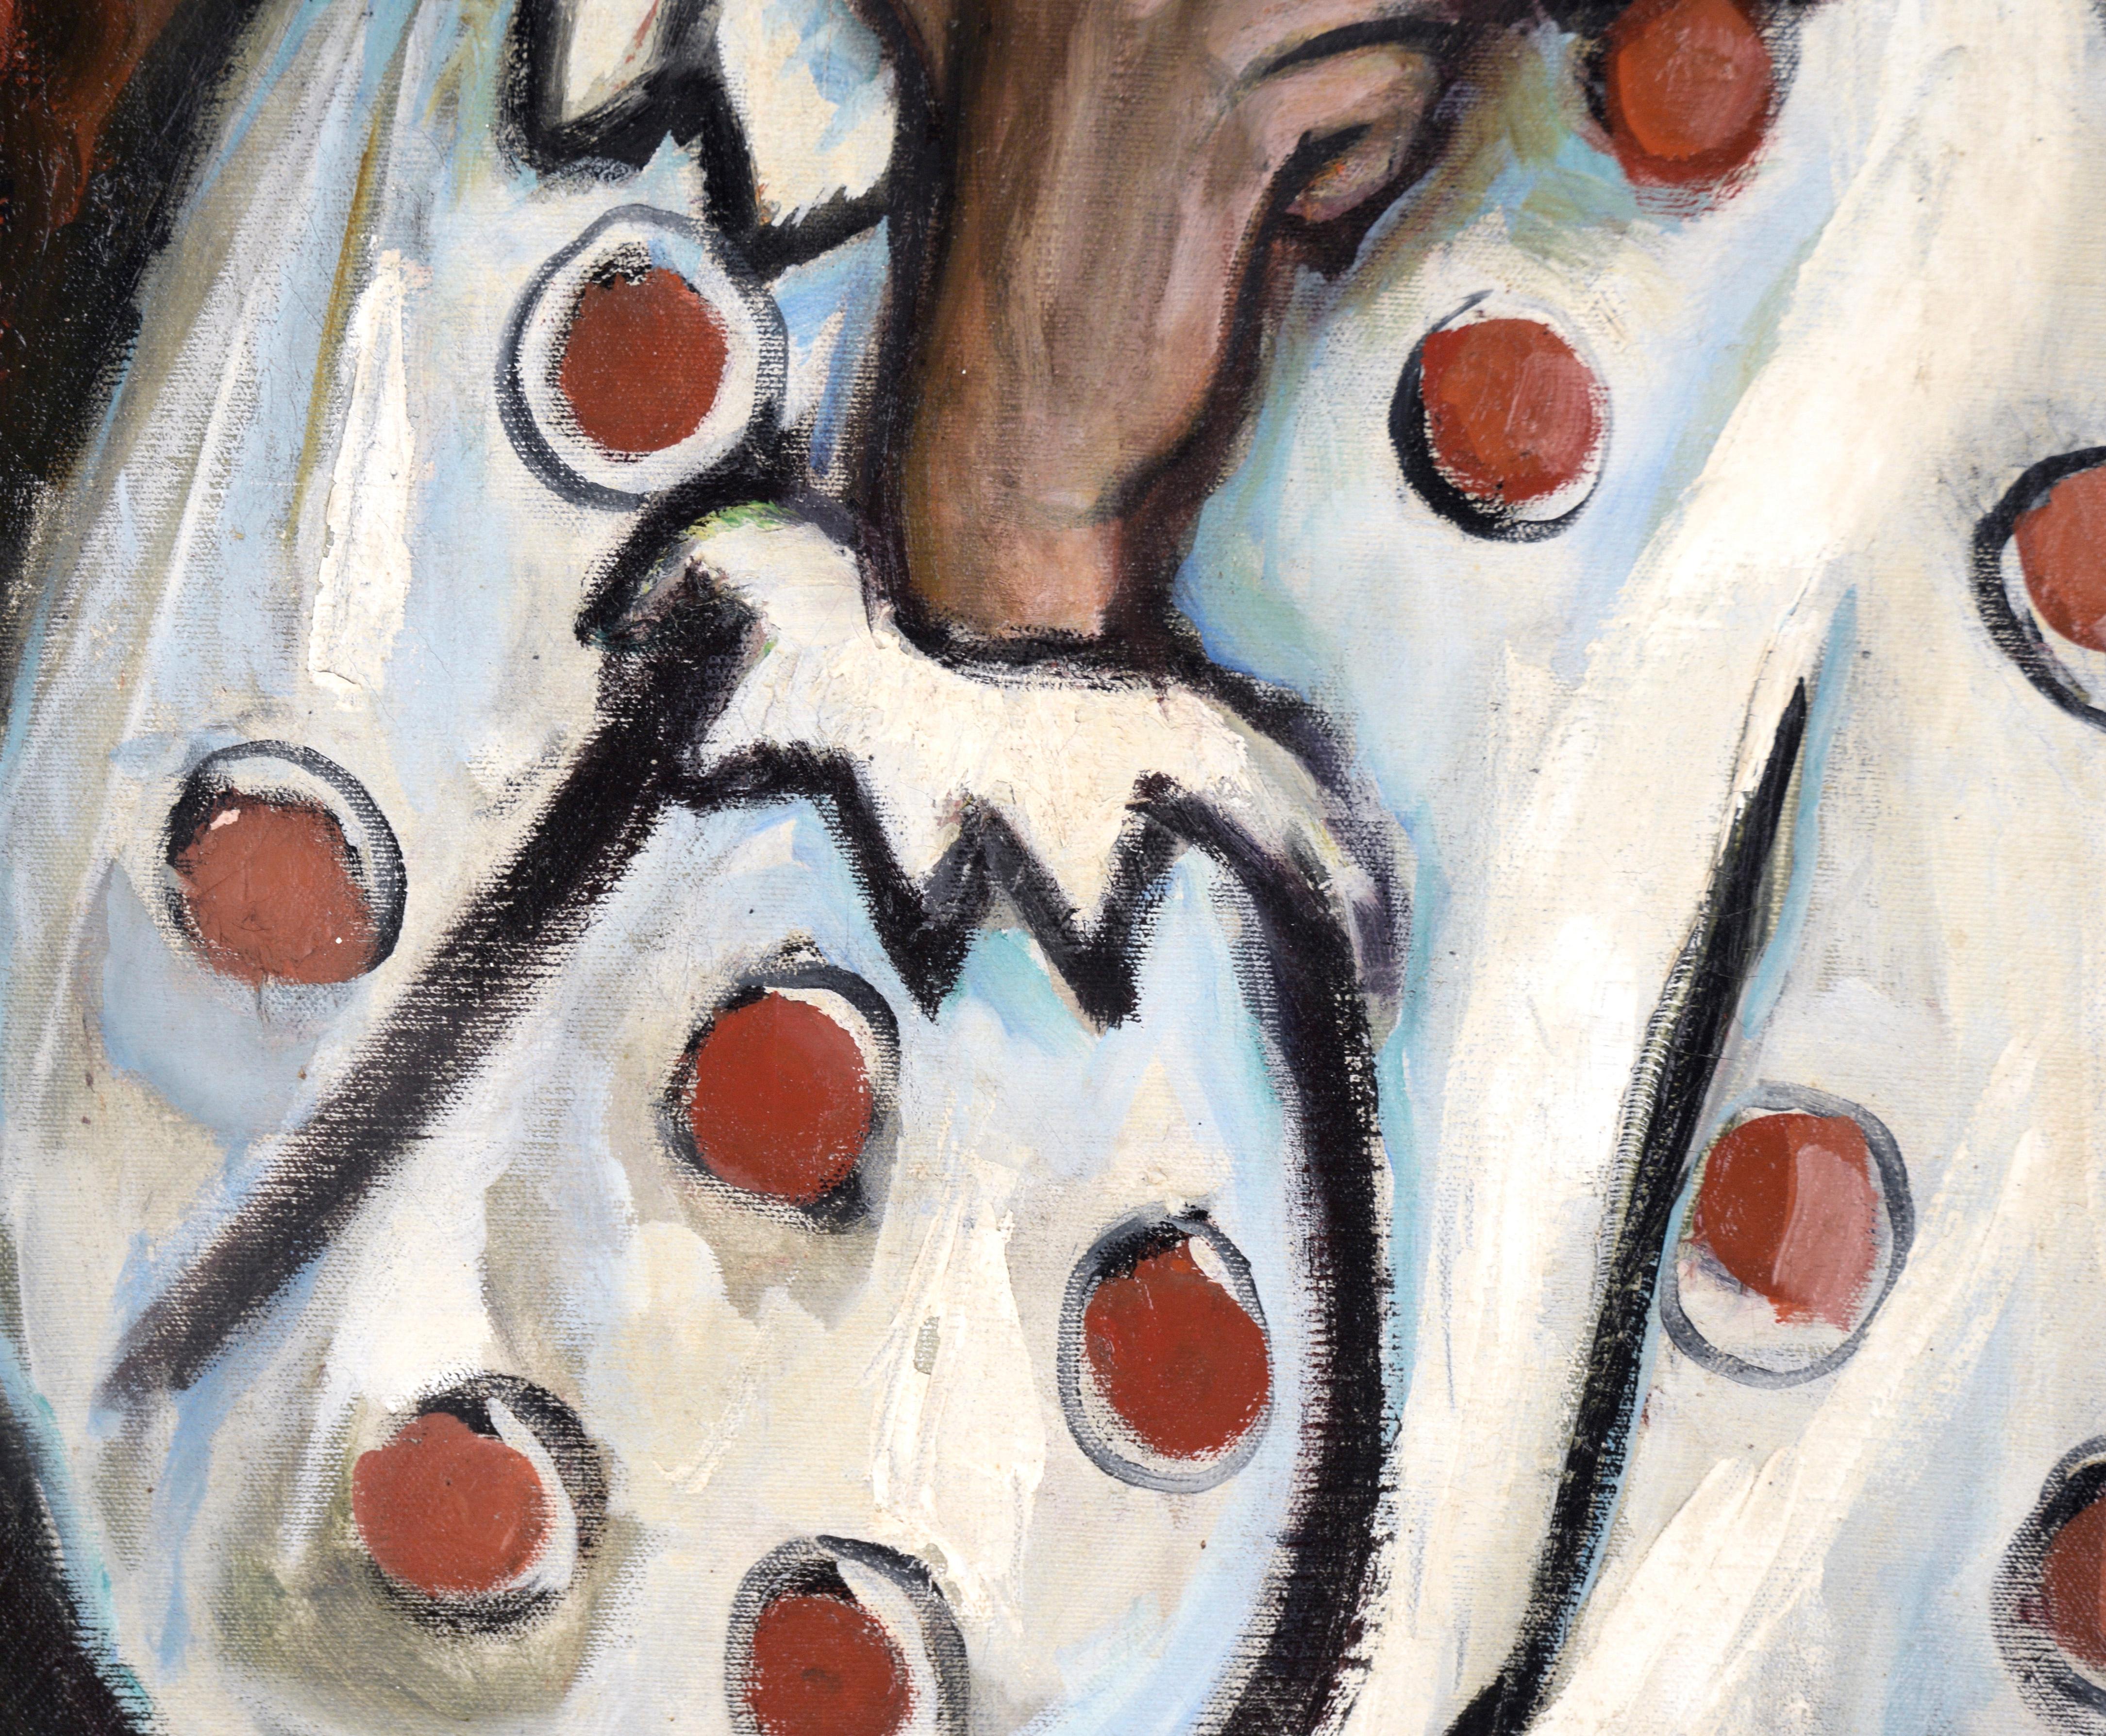 Portrait of a Man in a Polka Dot Clown Suit - Oil on Canvas

Portrait of a man in a white and red polka dot suit by a Joan Tidwell (American, 1930-2005). The clown is pensive, with his chin in his hand. He is standing in a room with red wallpaper.